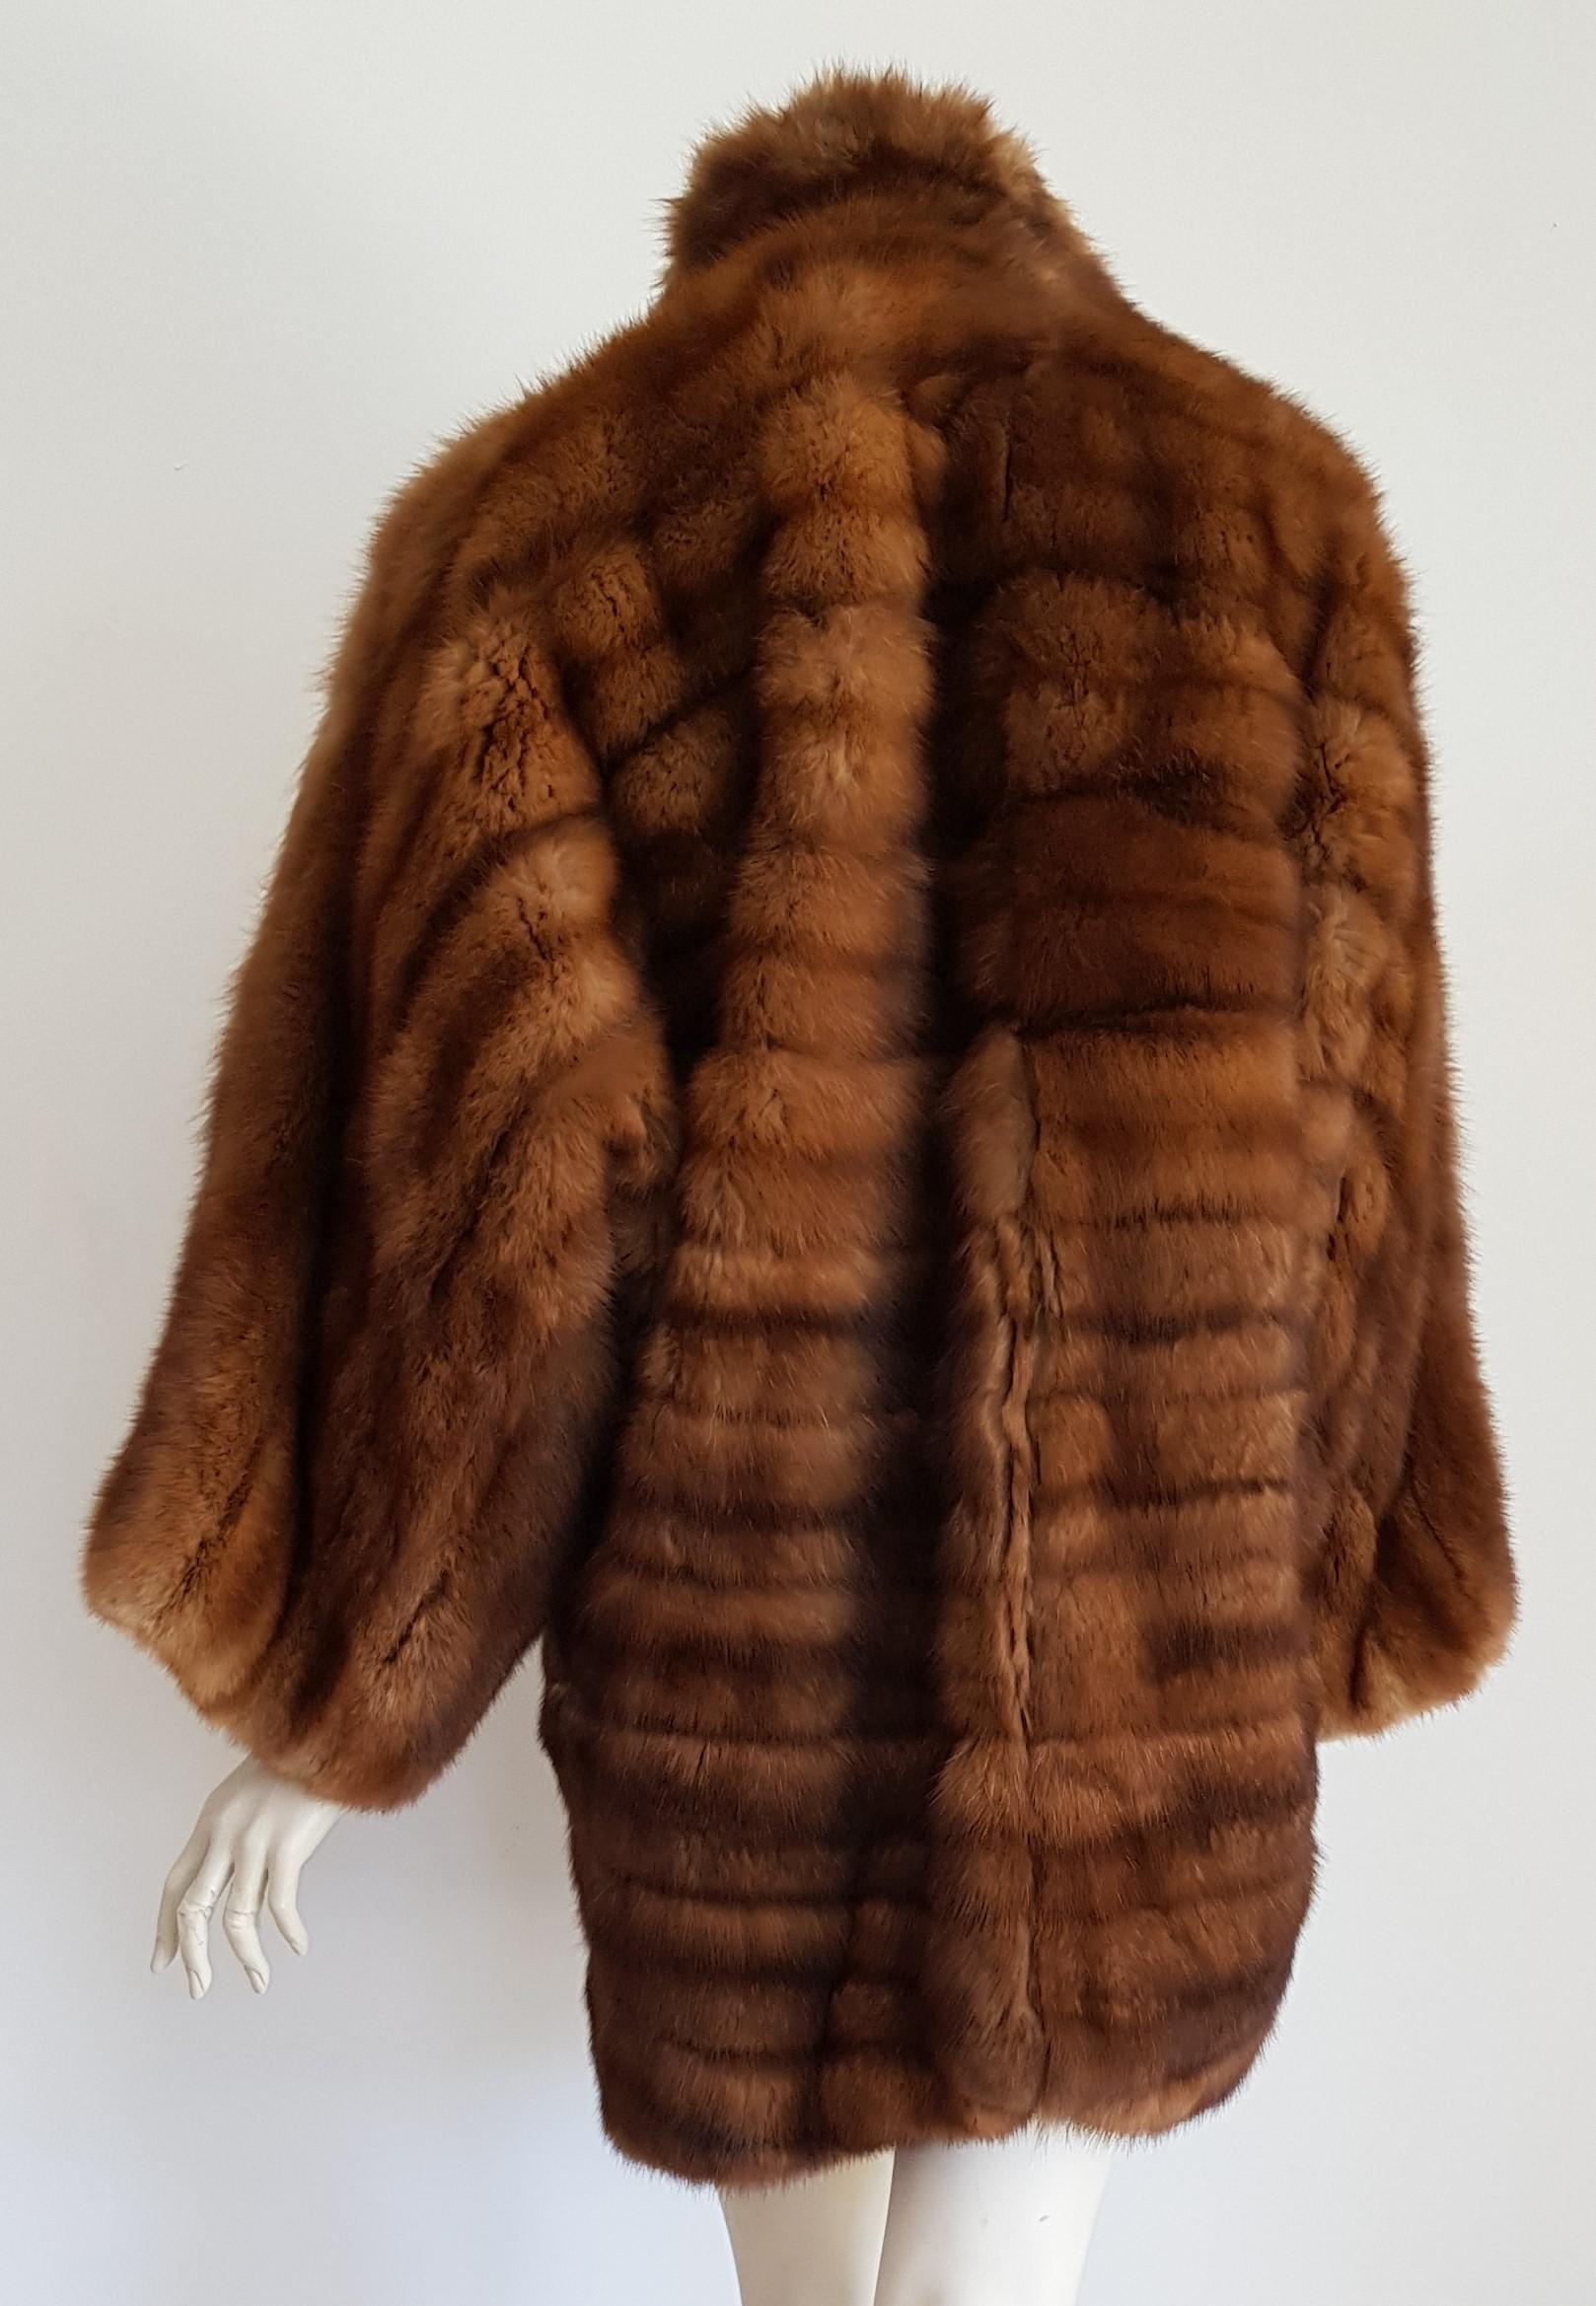 Gianfranco FERRÉ Haute Couture Brown Wild Russian Barguzinsky Sable Silk lined Fur Coat. Excellent condition. Kept in a cold room.
 
SIZE: equivalent to about Small / Medium / Large / XL / XXL, please review approx measurements as follows in cm: